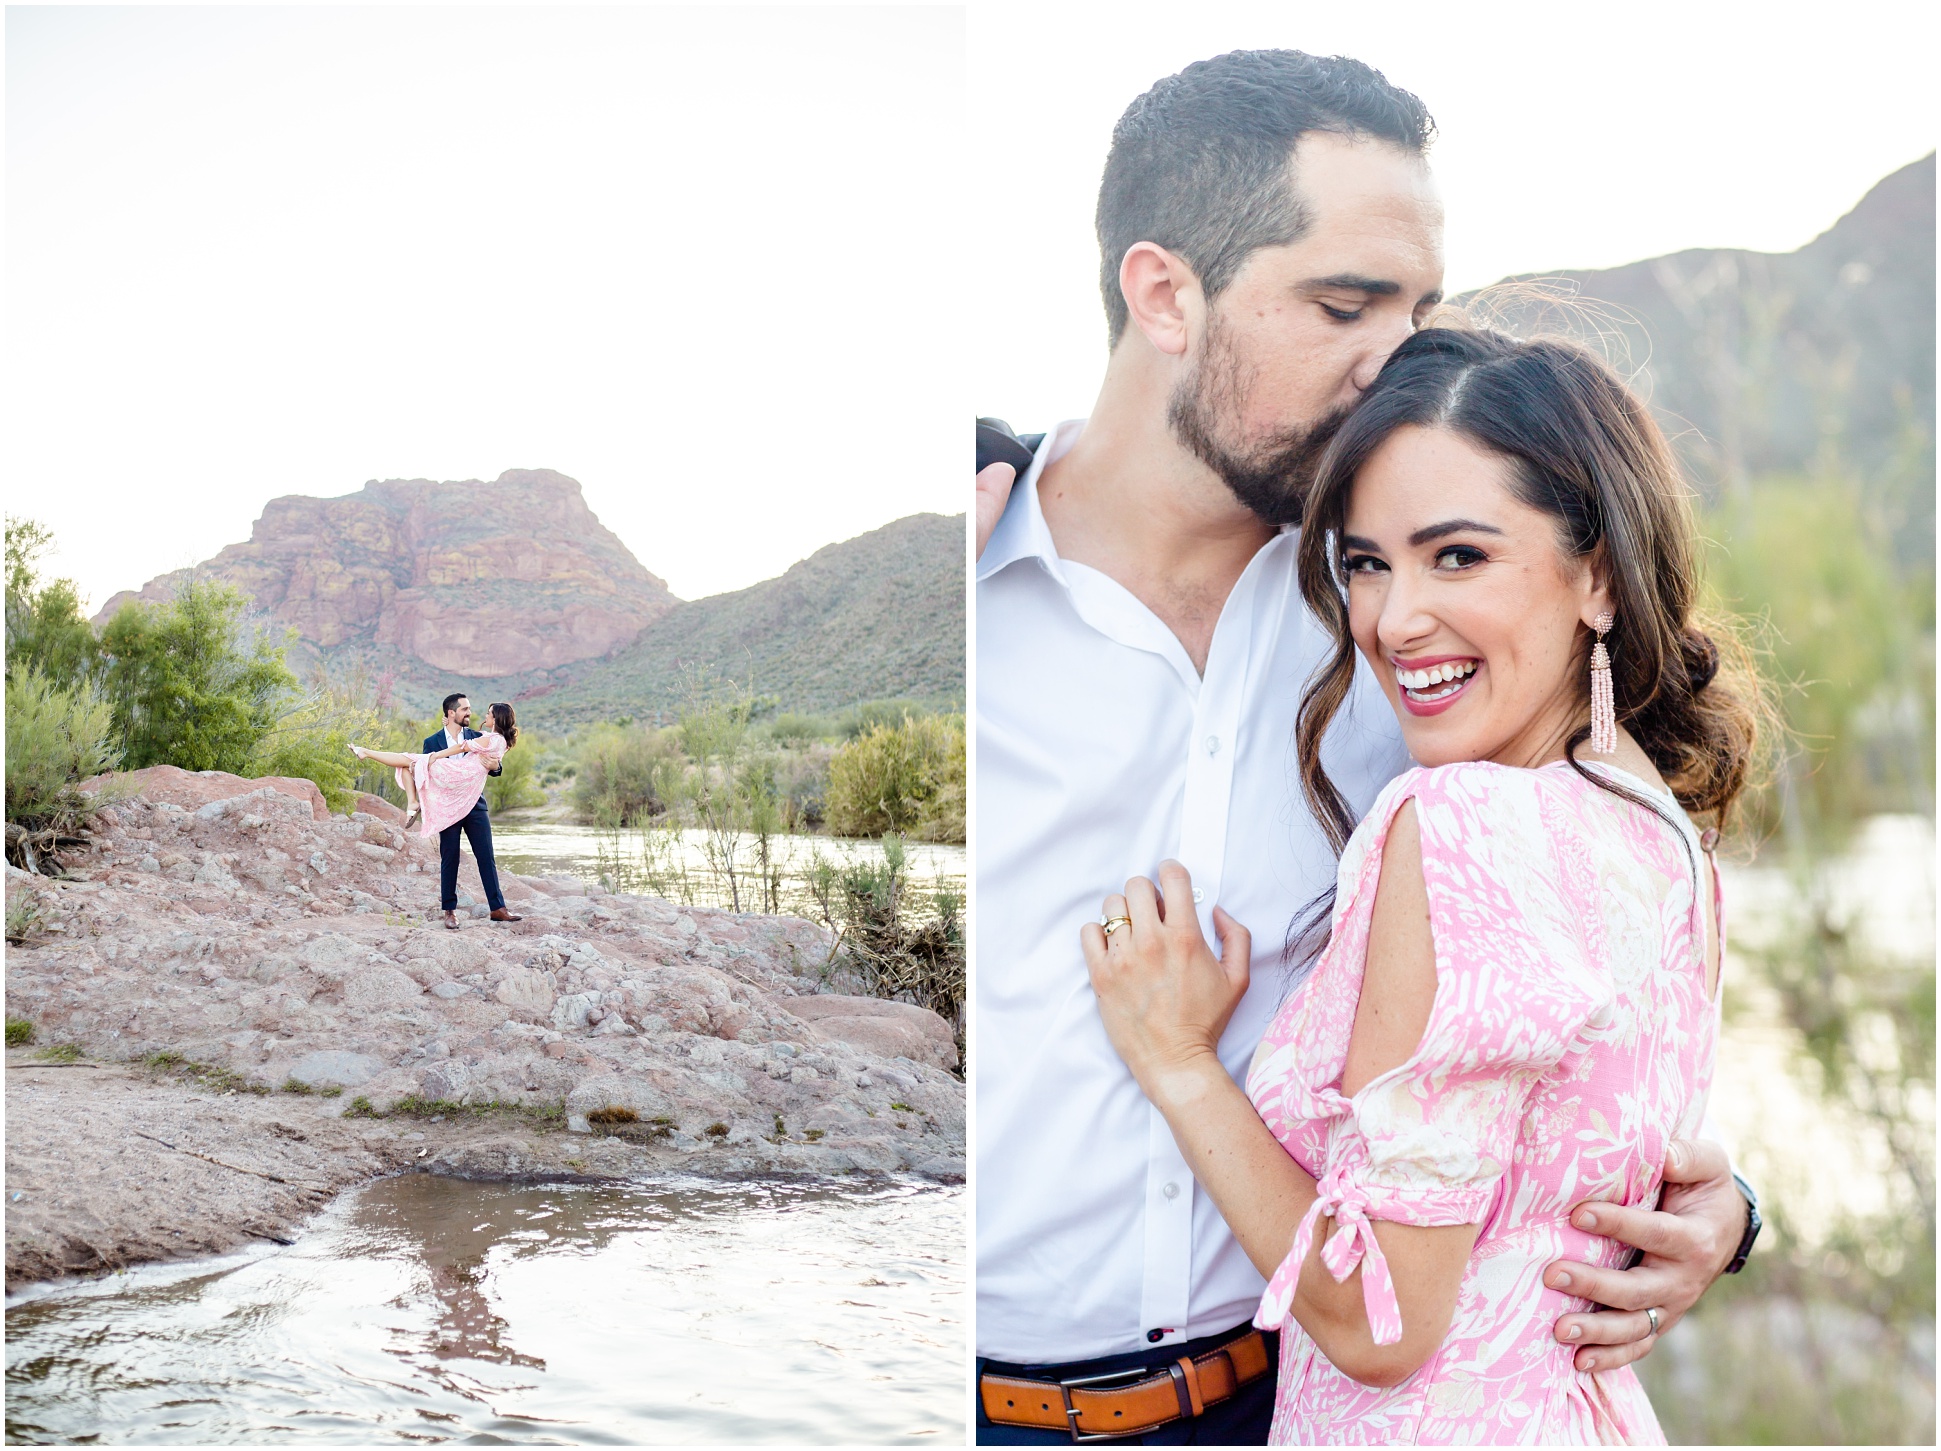 Left: Paul holds Anette in a cradle at the Salt River, Right: Paul and Anette snuggle up as Paul kisses her temple